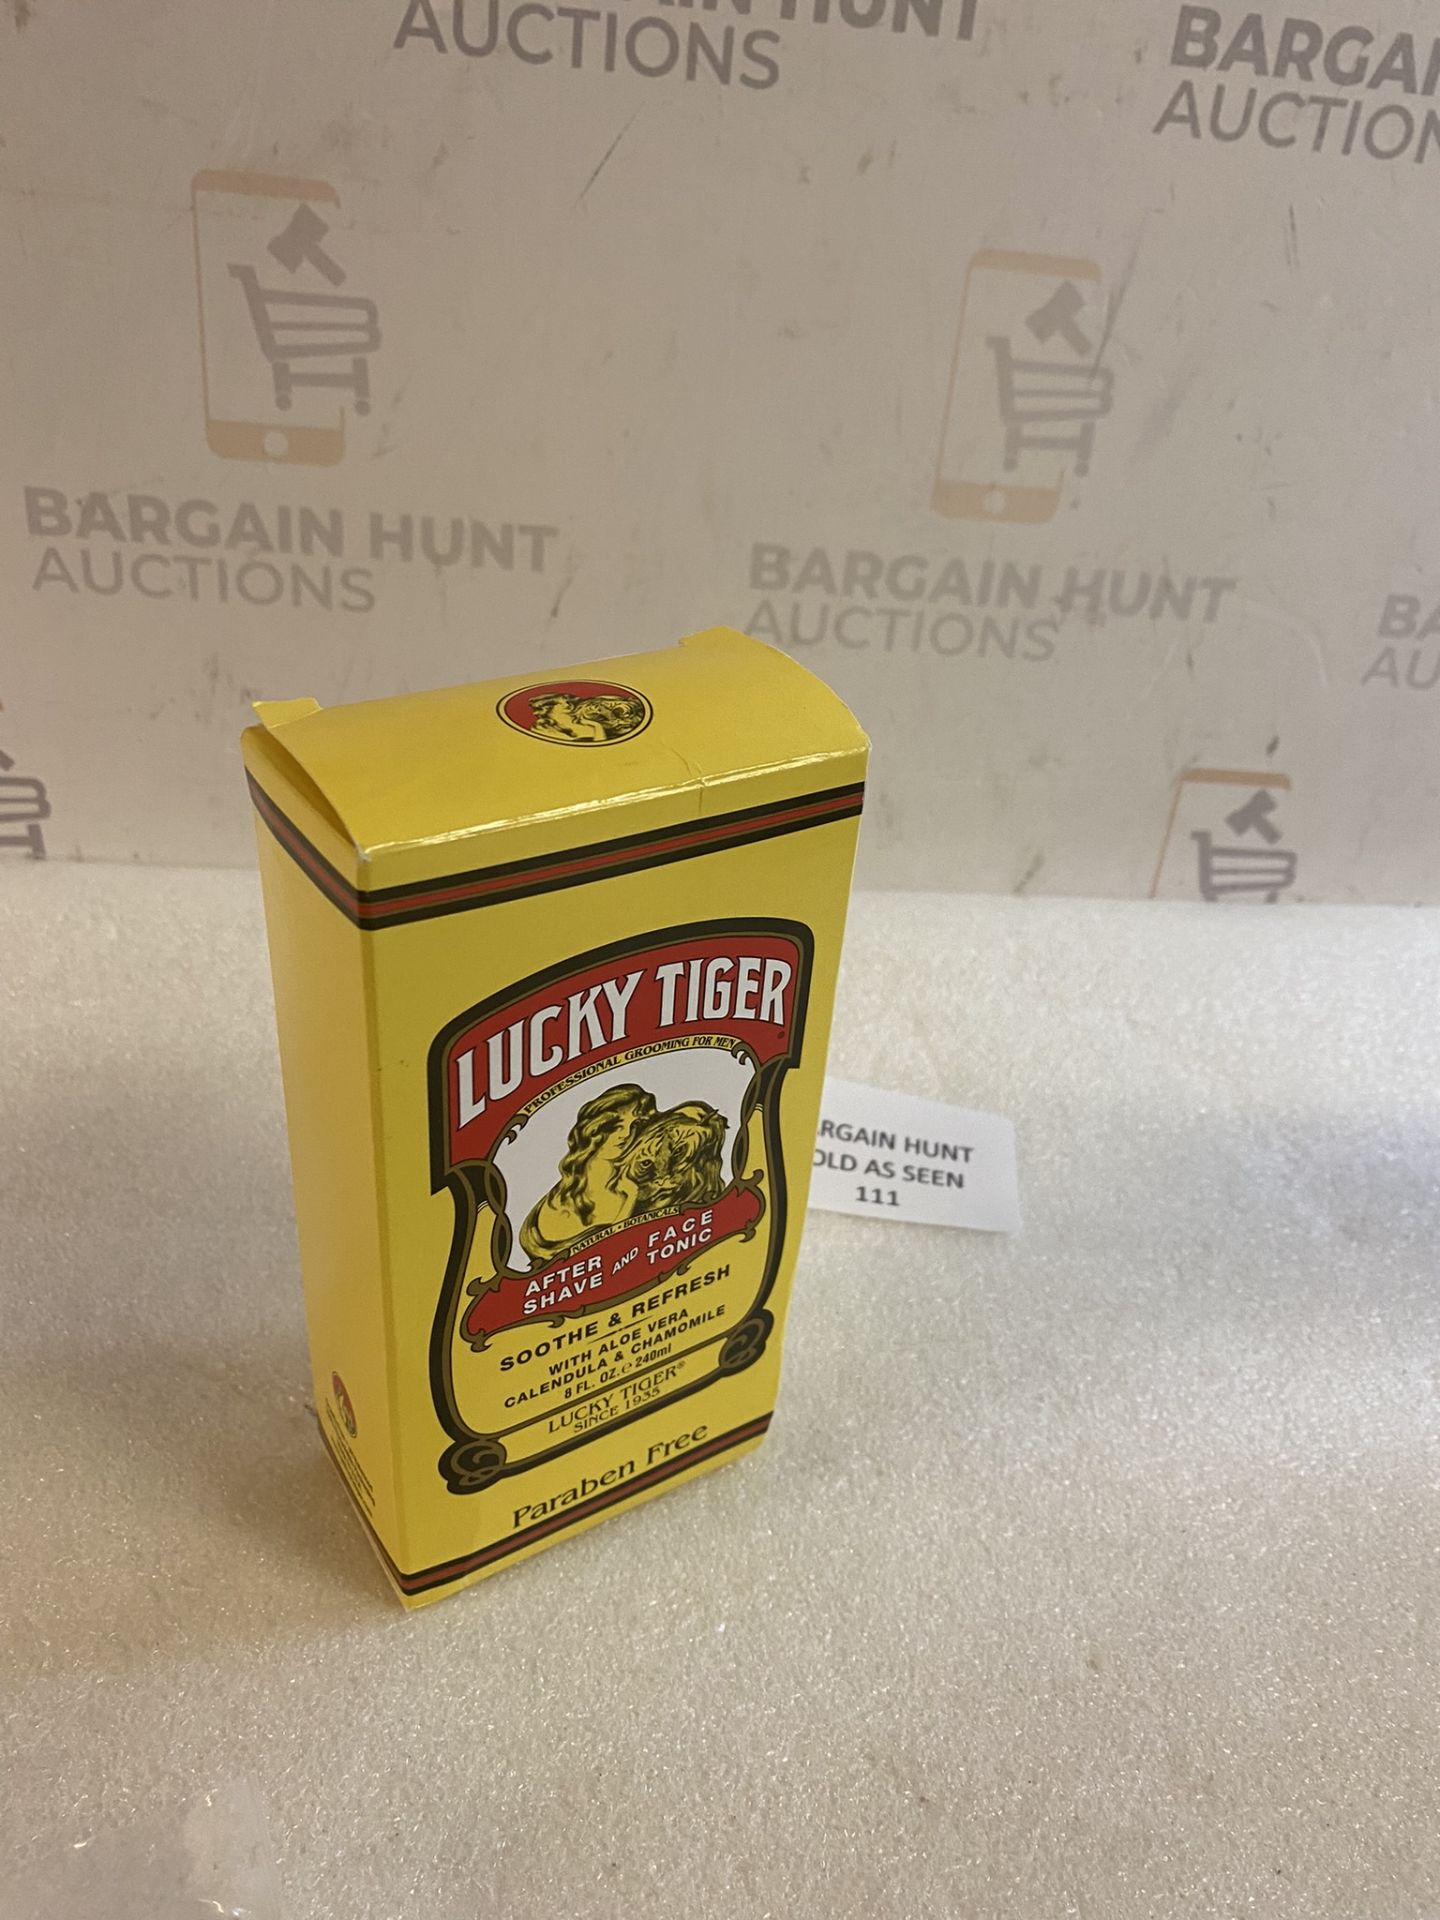 Lucky Tiger After Shave and Face Tonic, 8 Ounce